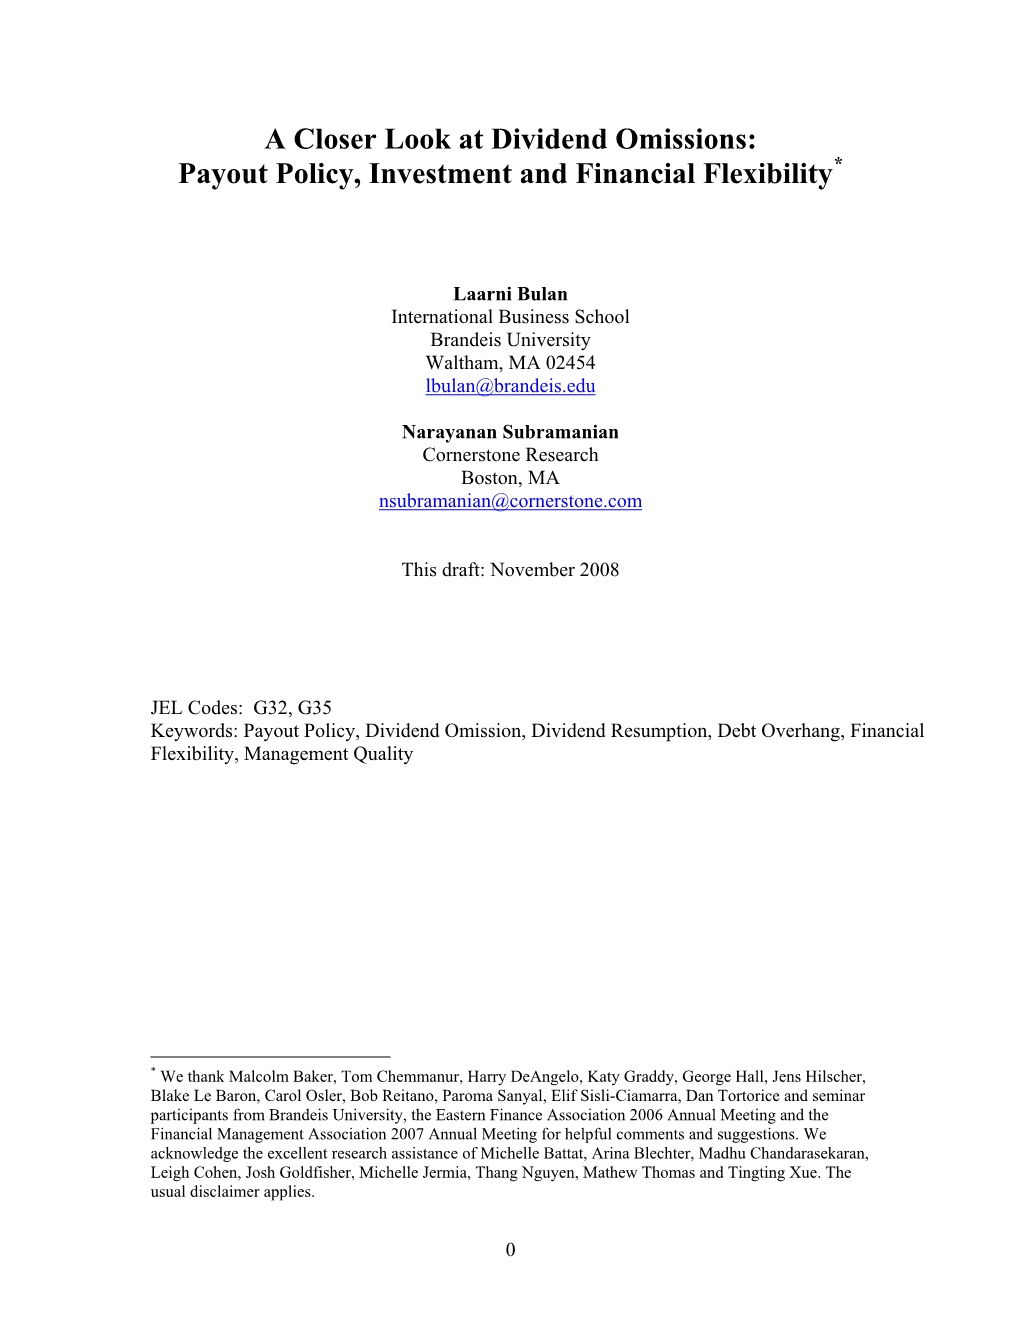 A Closer Look at Dividend Omissions: Payout Policy, Investment and Financial Flexibility*